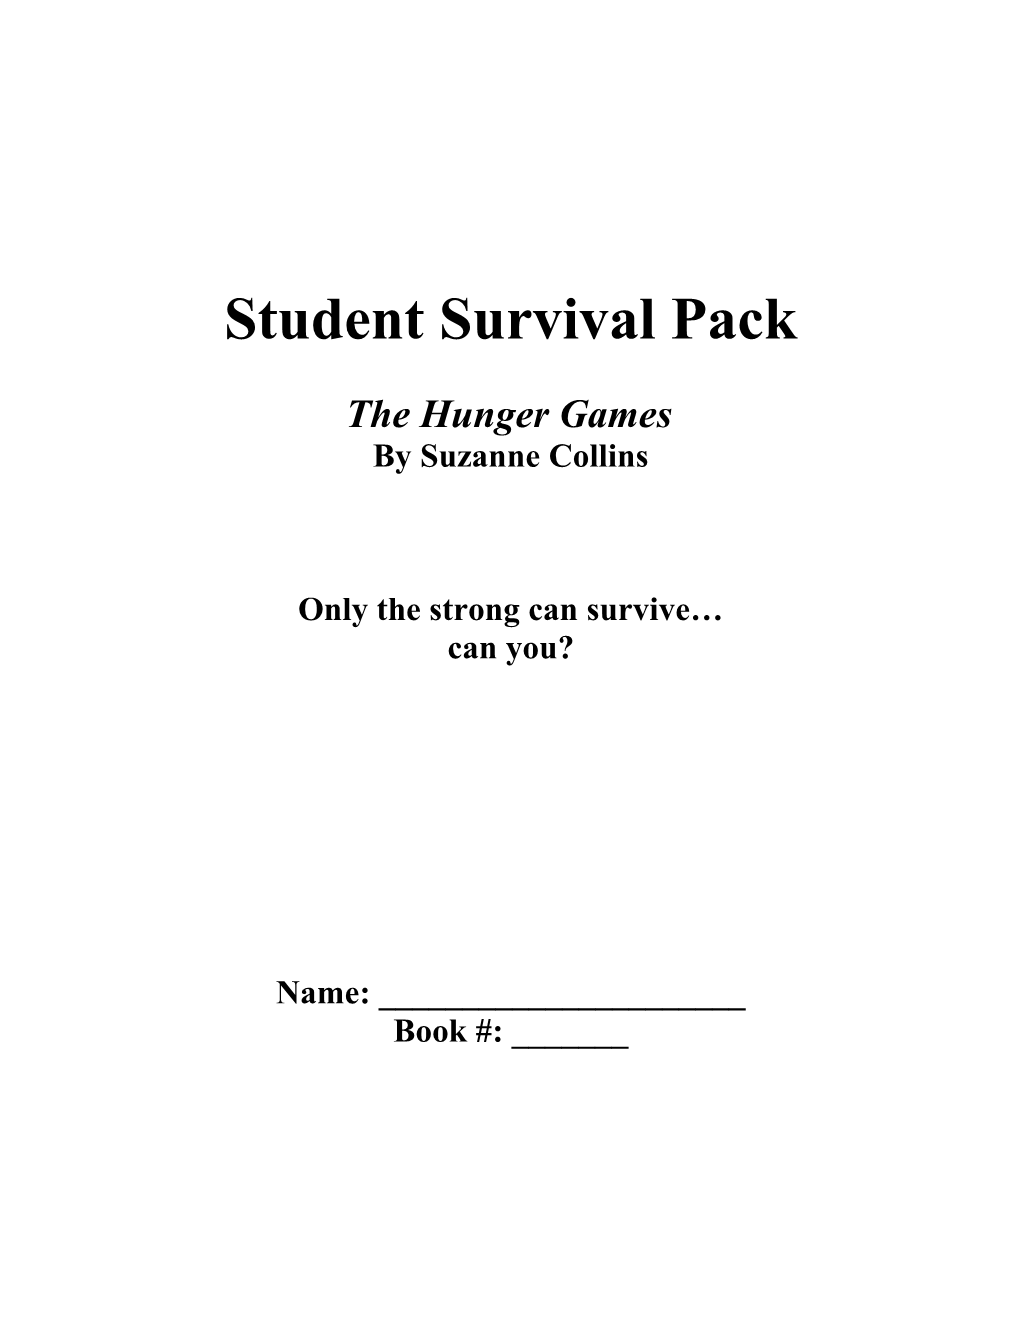 Student Survival Pack